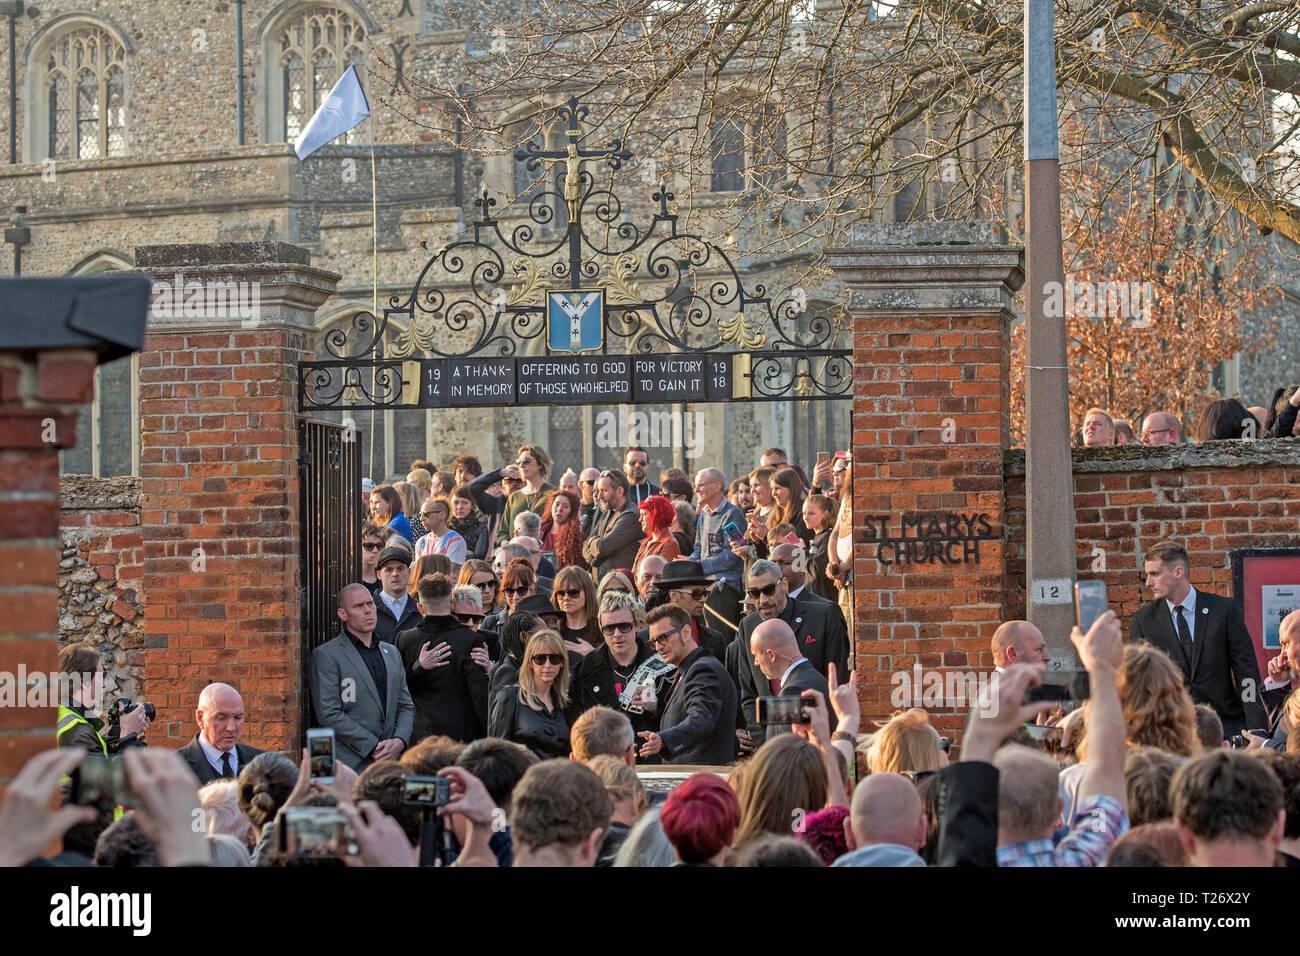 Essex, UK. 30th March 2019. The  funeral of Prodigy singer Keith Flint at St Marys Church in Bocking,  Essex today. Mourners leave the service and band members Liam Howlett, Maxim (Keith Palmer) and Leeroy Thornhill can be seen leaving the front gates of the church. Credit: Phil Rees/Alamy Live News Stock Photo